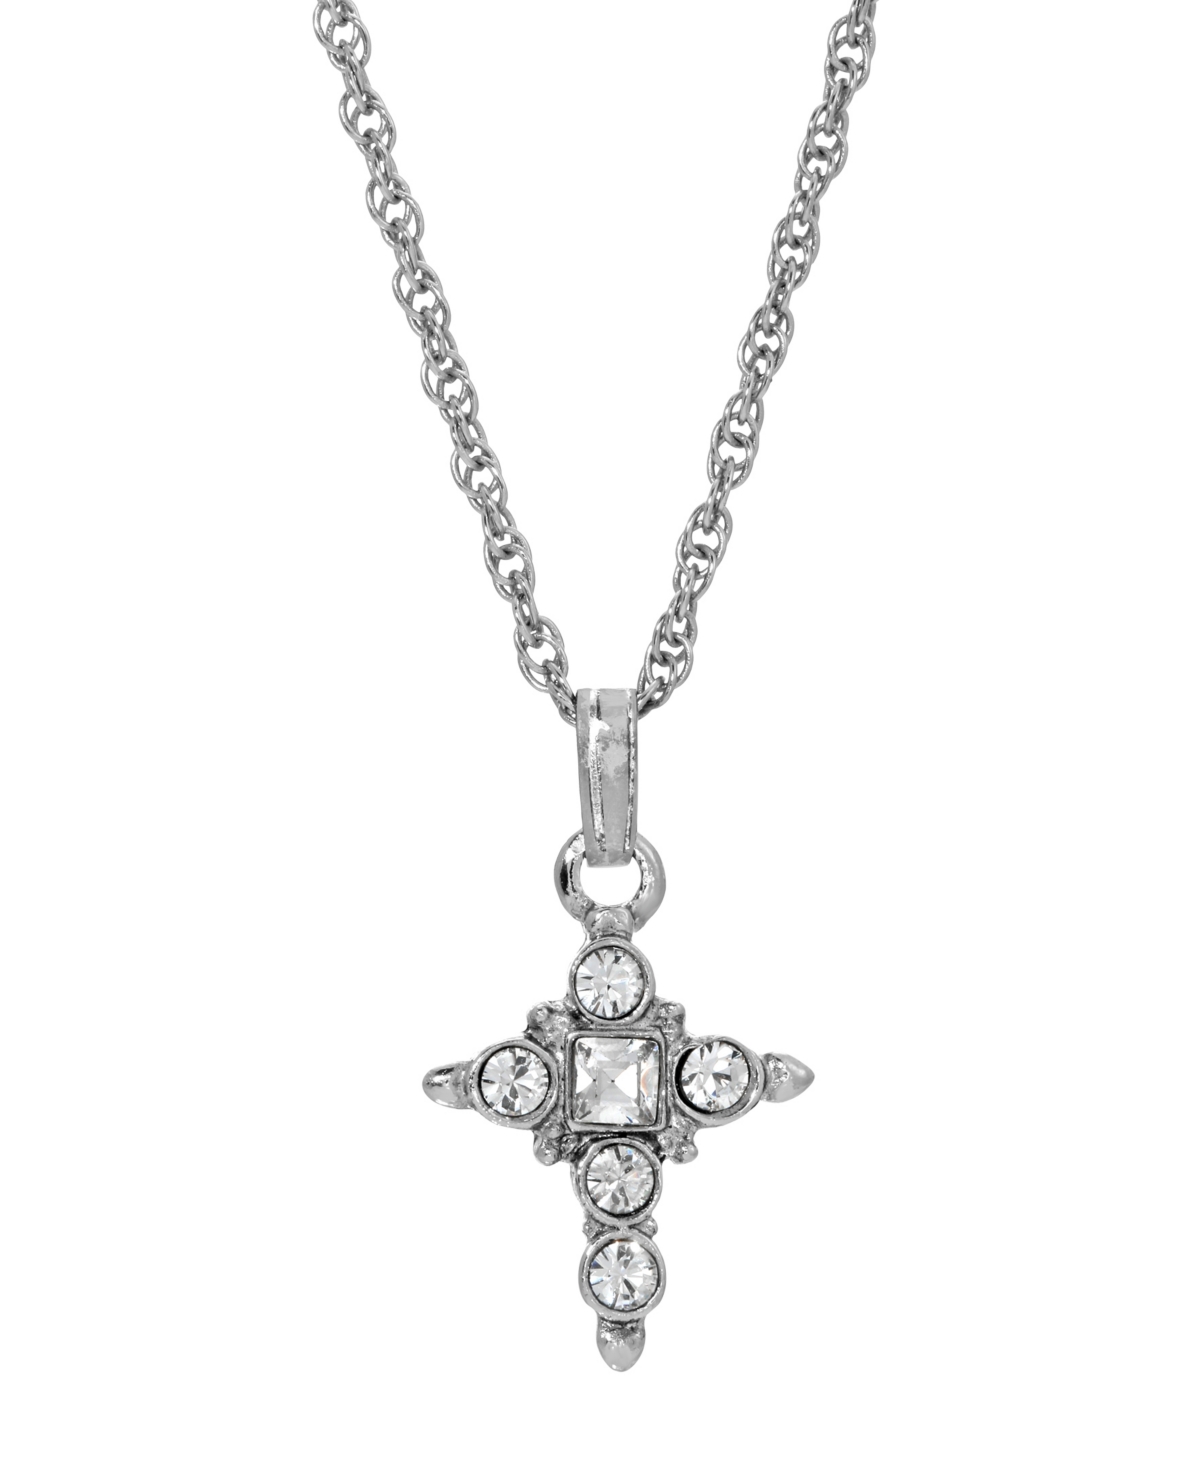 Silver-Tone Crystal Cross Pendant Necklace - White